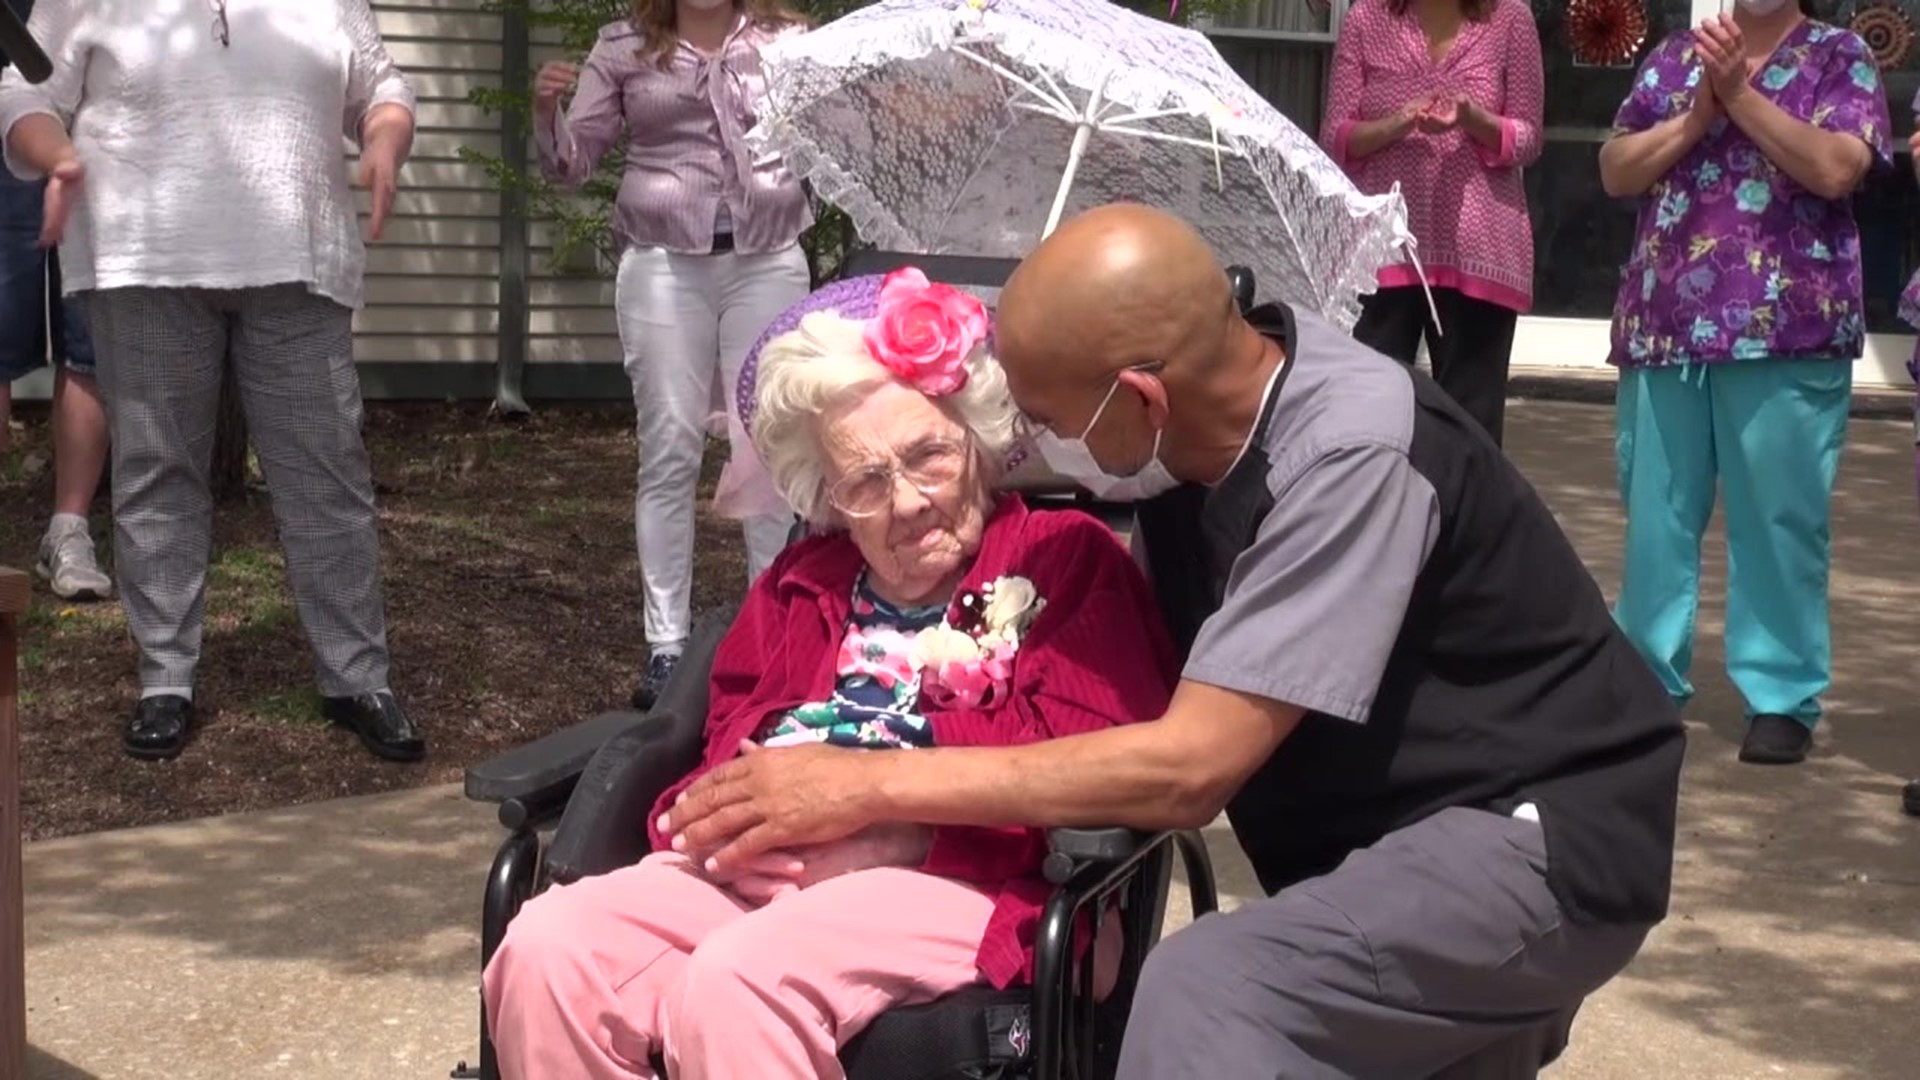 She is one of the oldest people in our area, and every year, Newswatch 16 promises to attend her birthday party.